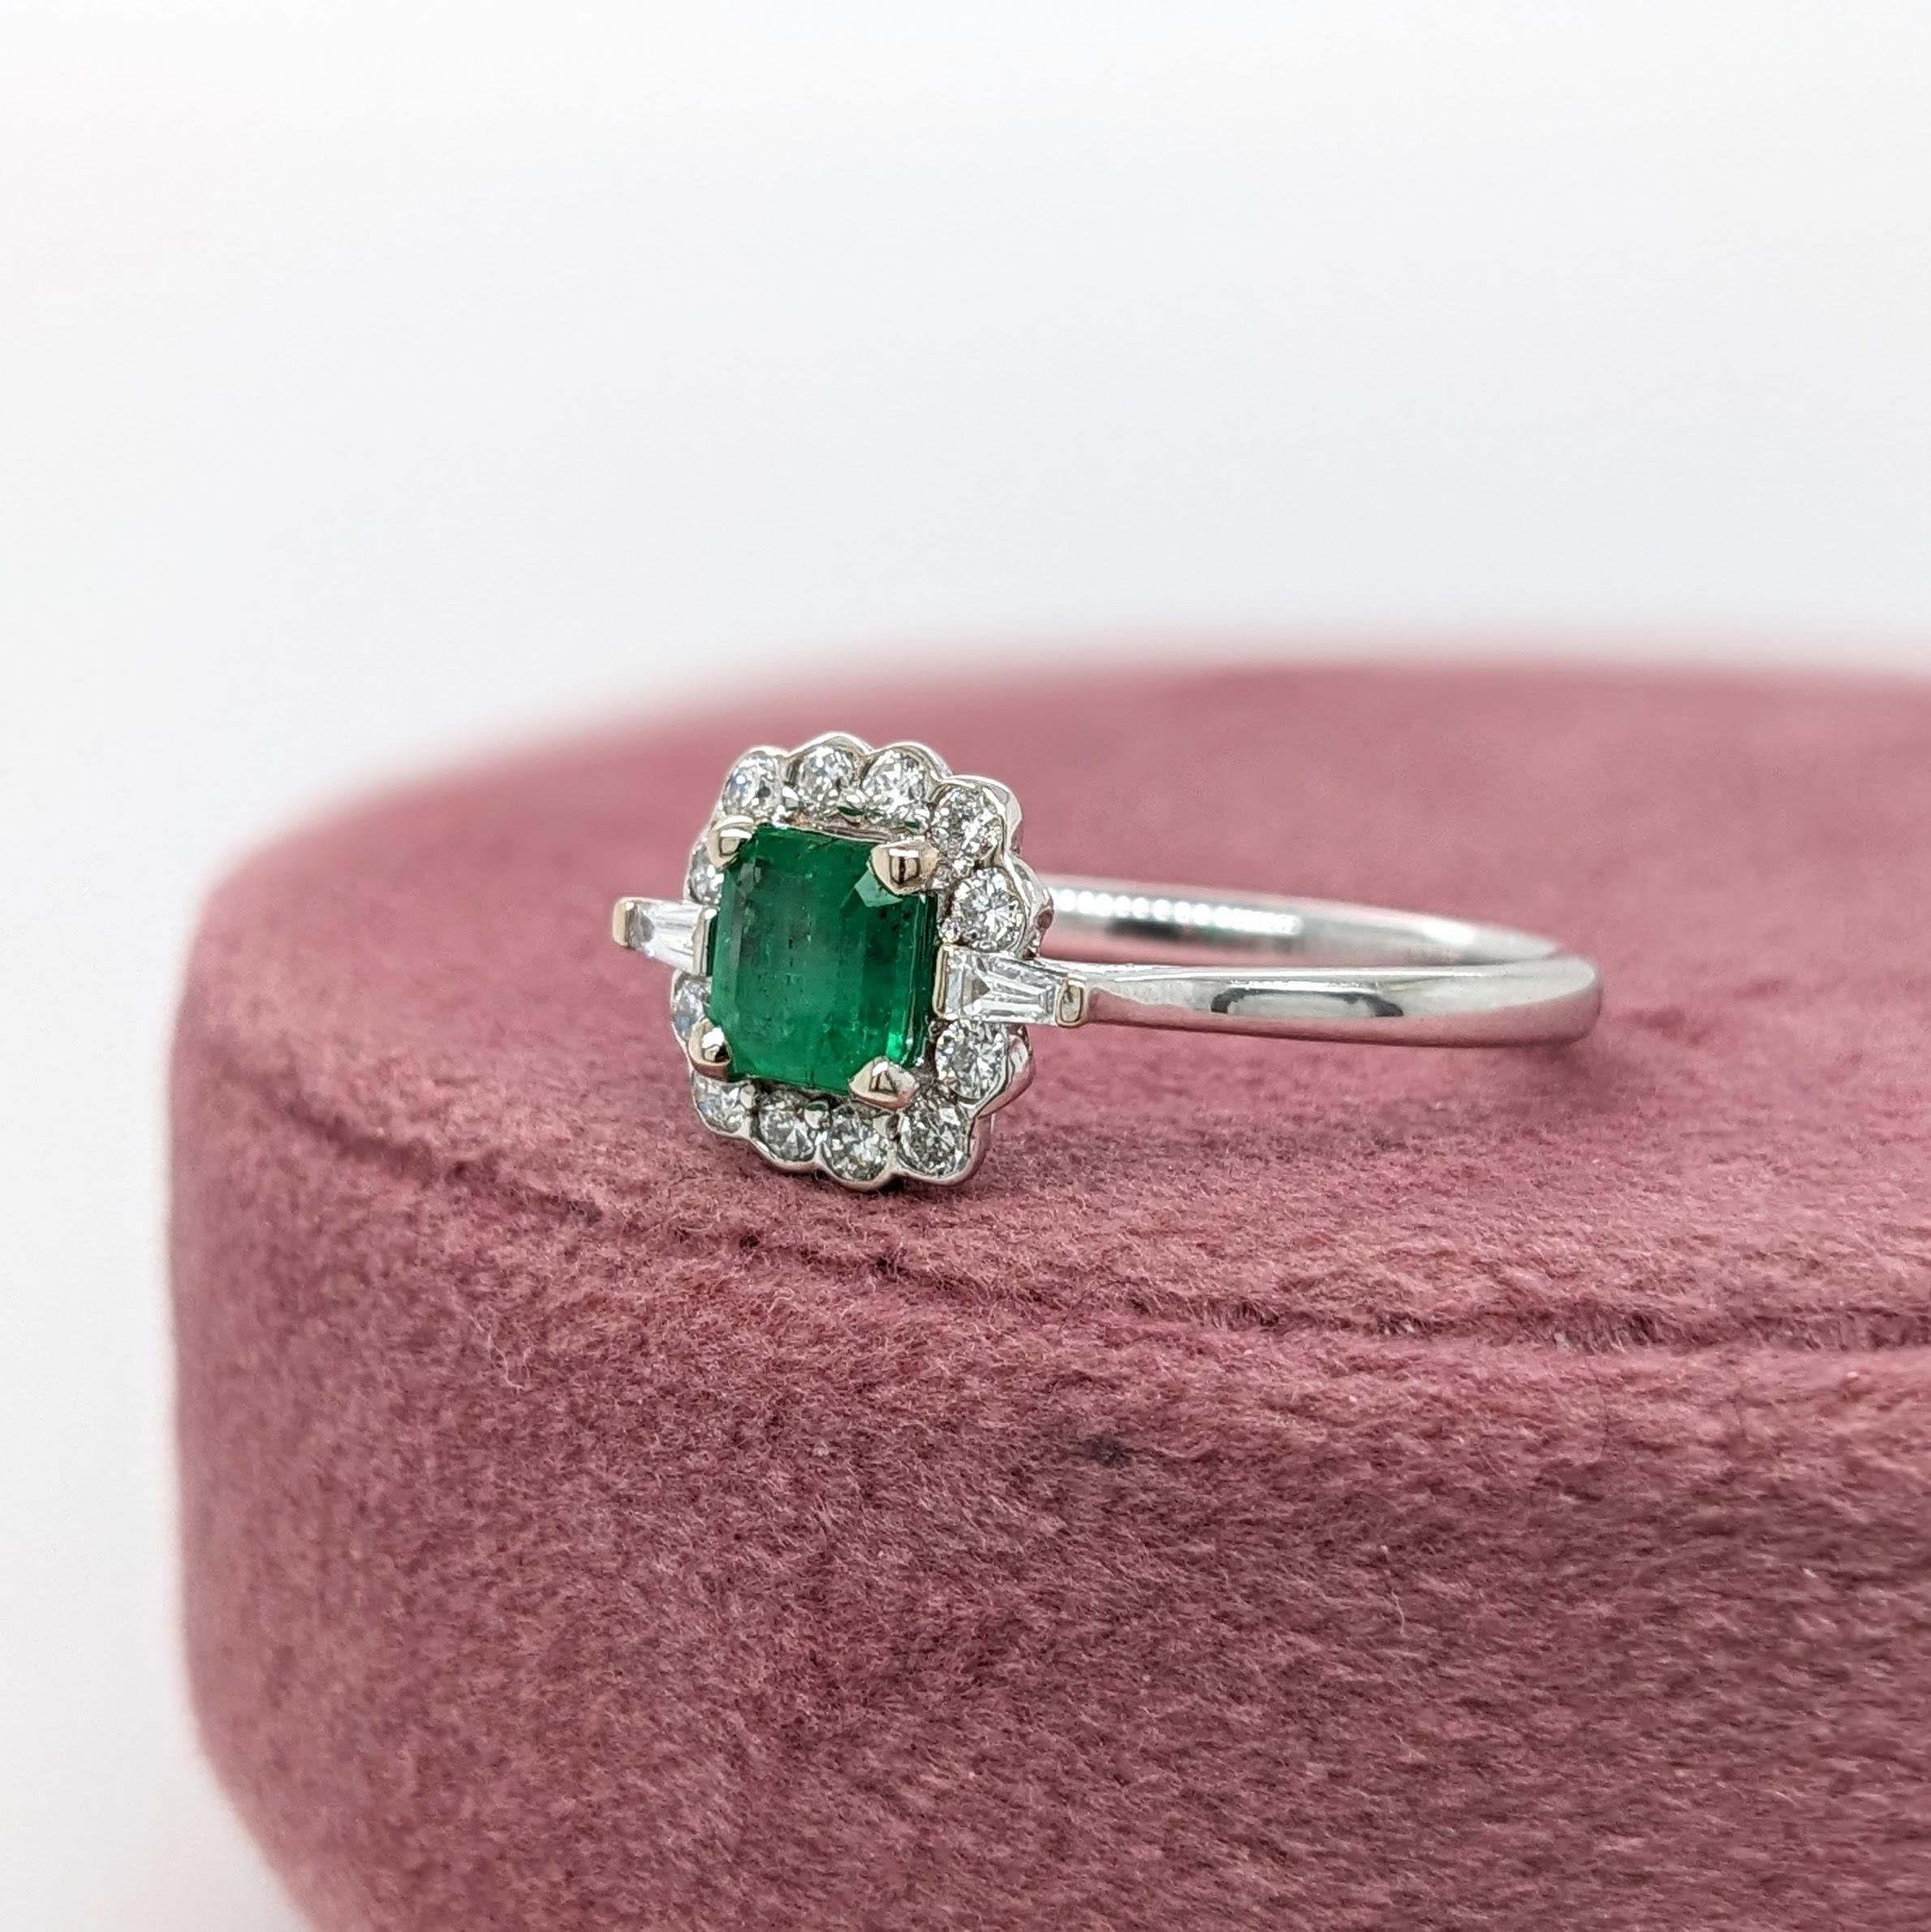 Modernist Emerald w Diamond Halo & Tapered Baguette Accents in 14K Gold Emerald Cut 5mm